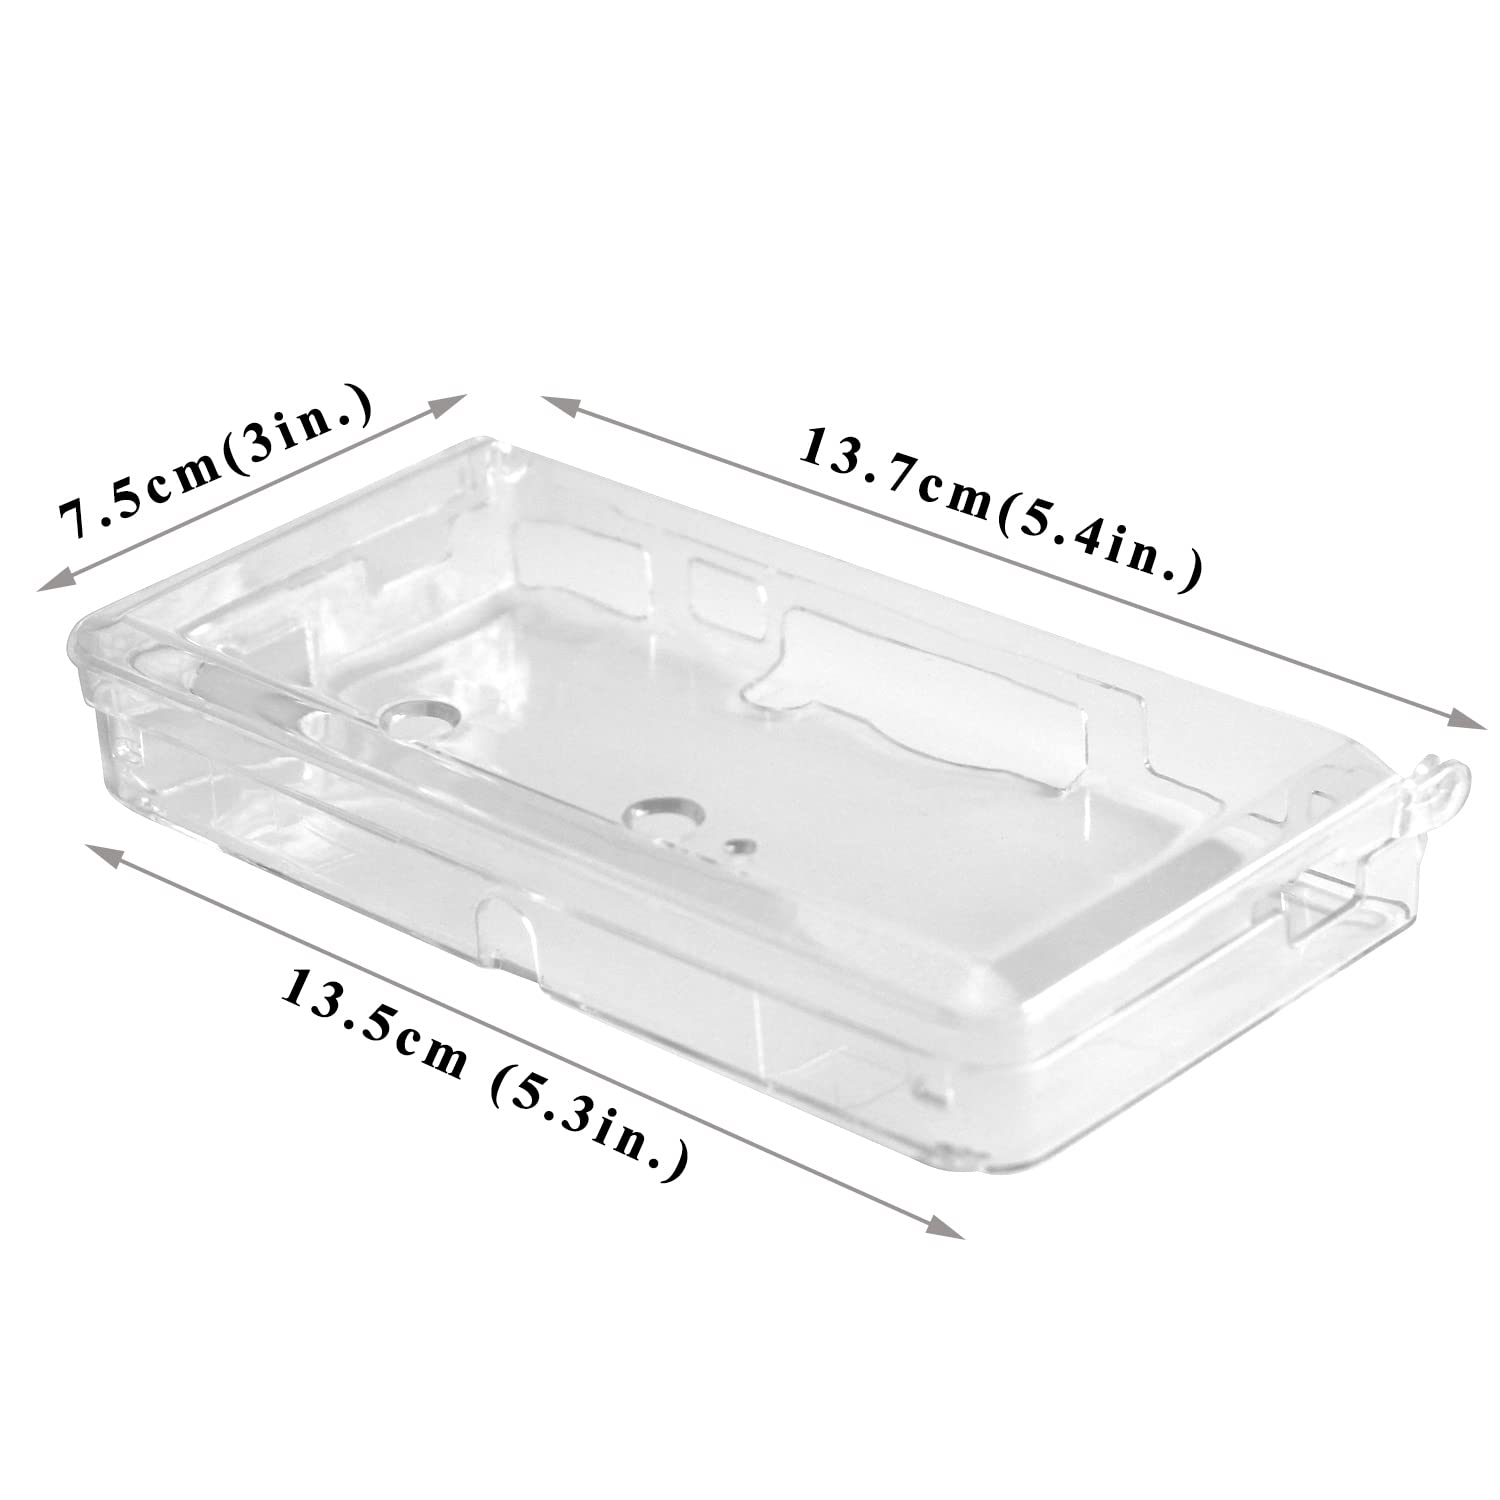 OSTENT Hard Crystal Case Clear Skin Cover Shell for Nintendo 3DS